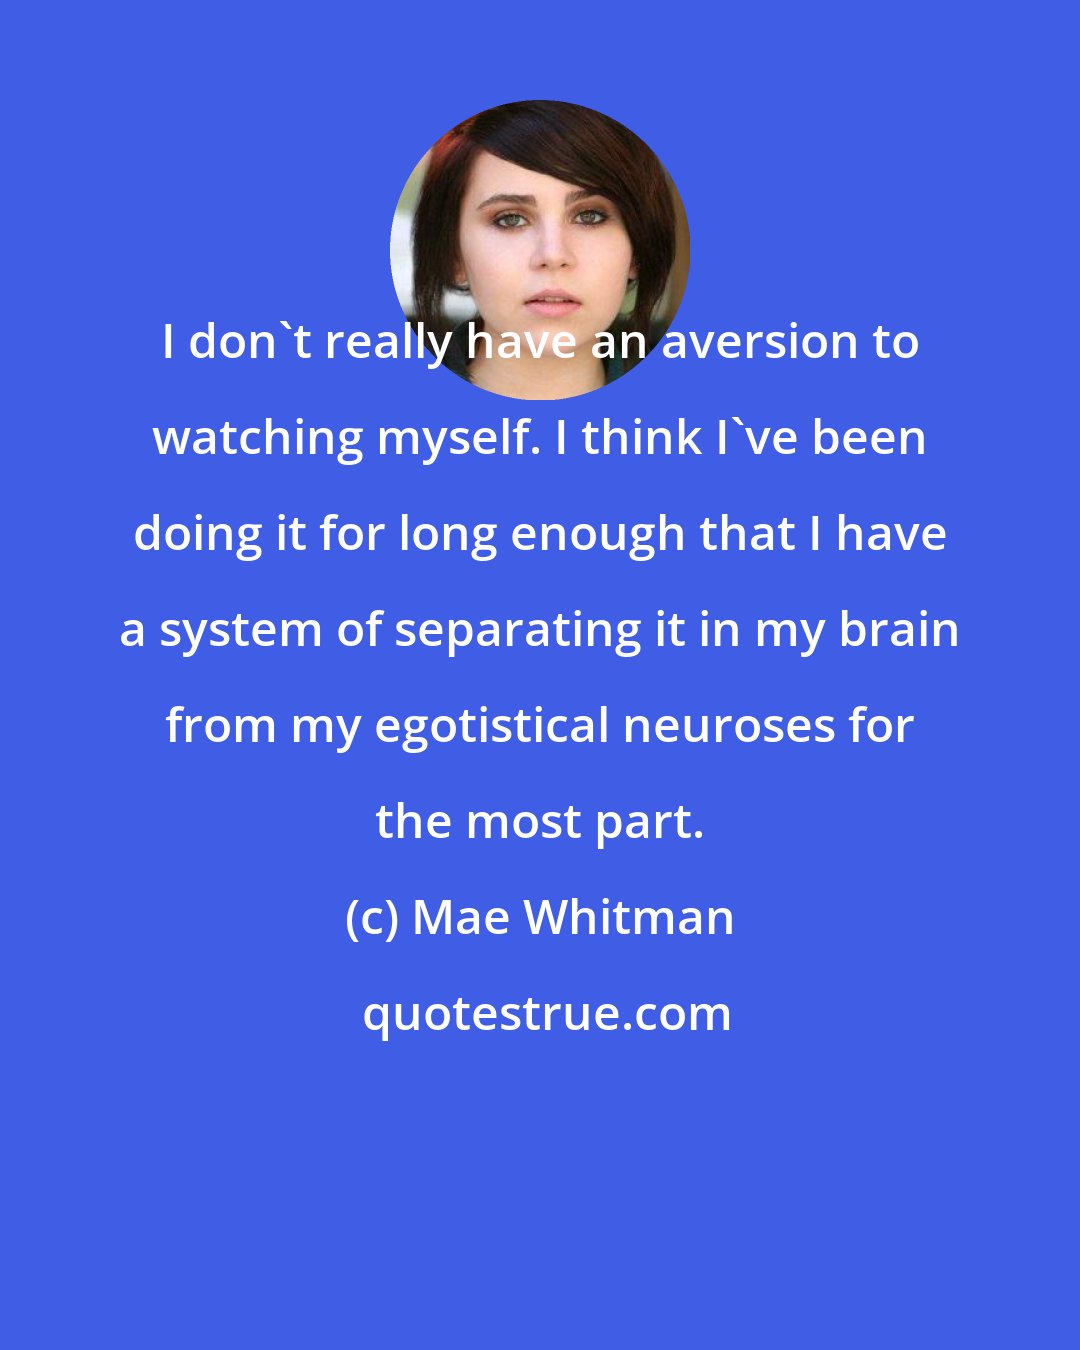 Mae Whitman: I don't really have an aversion to watching myself. I think I've been doing it for long enough that I have a system of separating it in my brain from my egotistical neuroses for the most part.